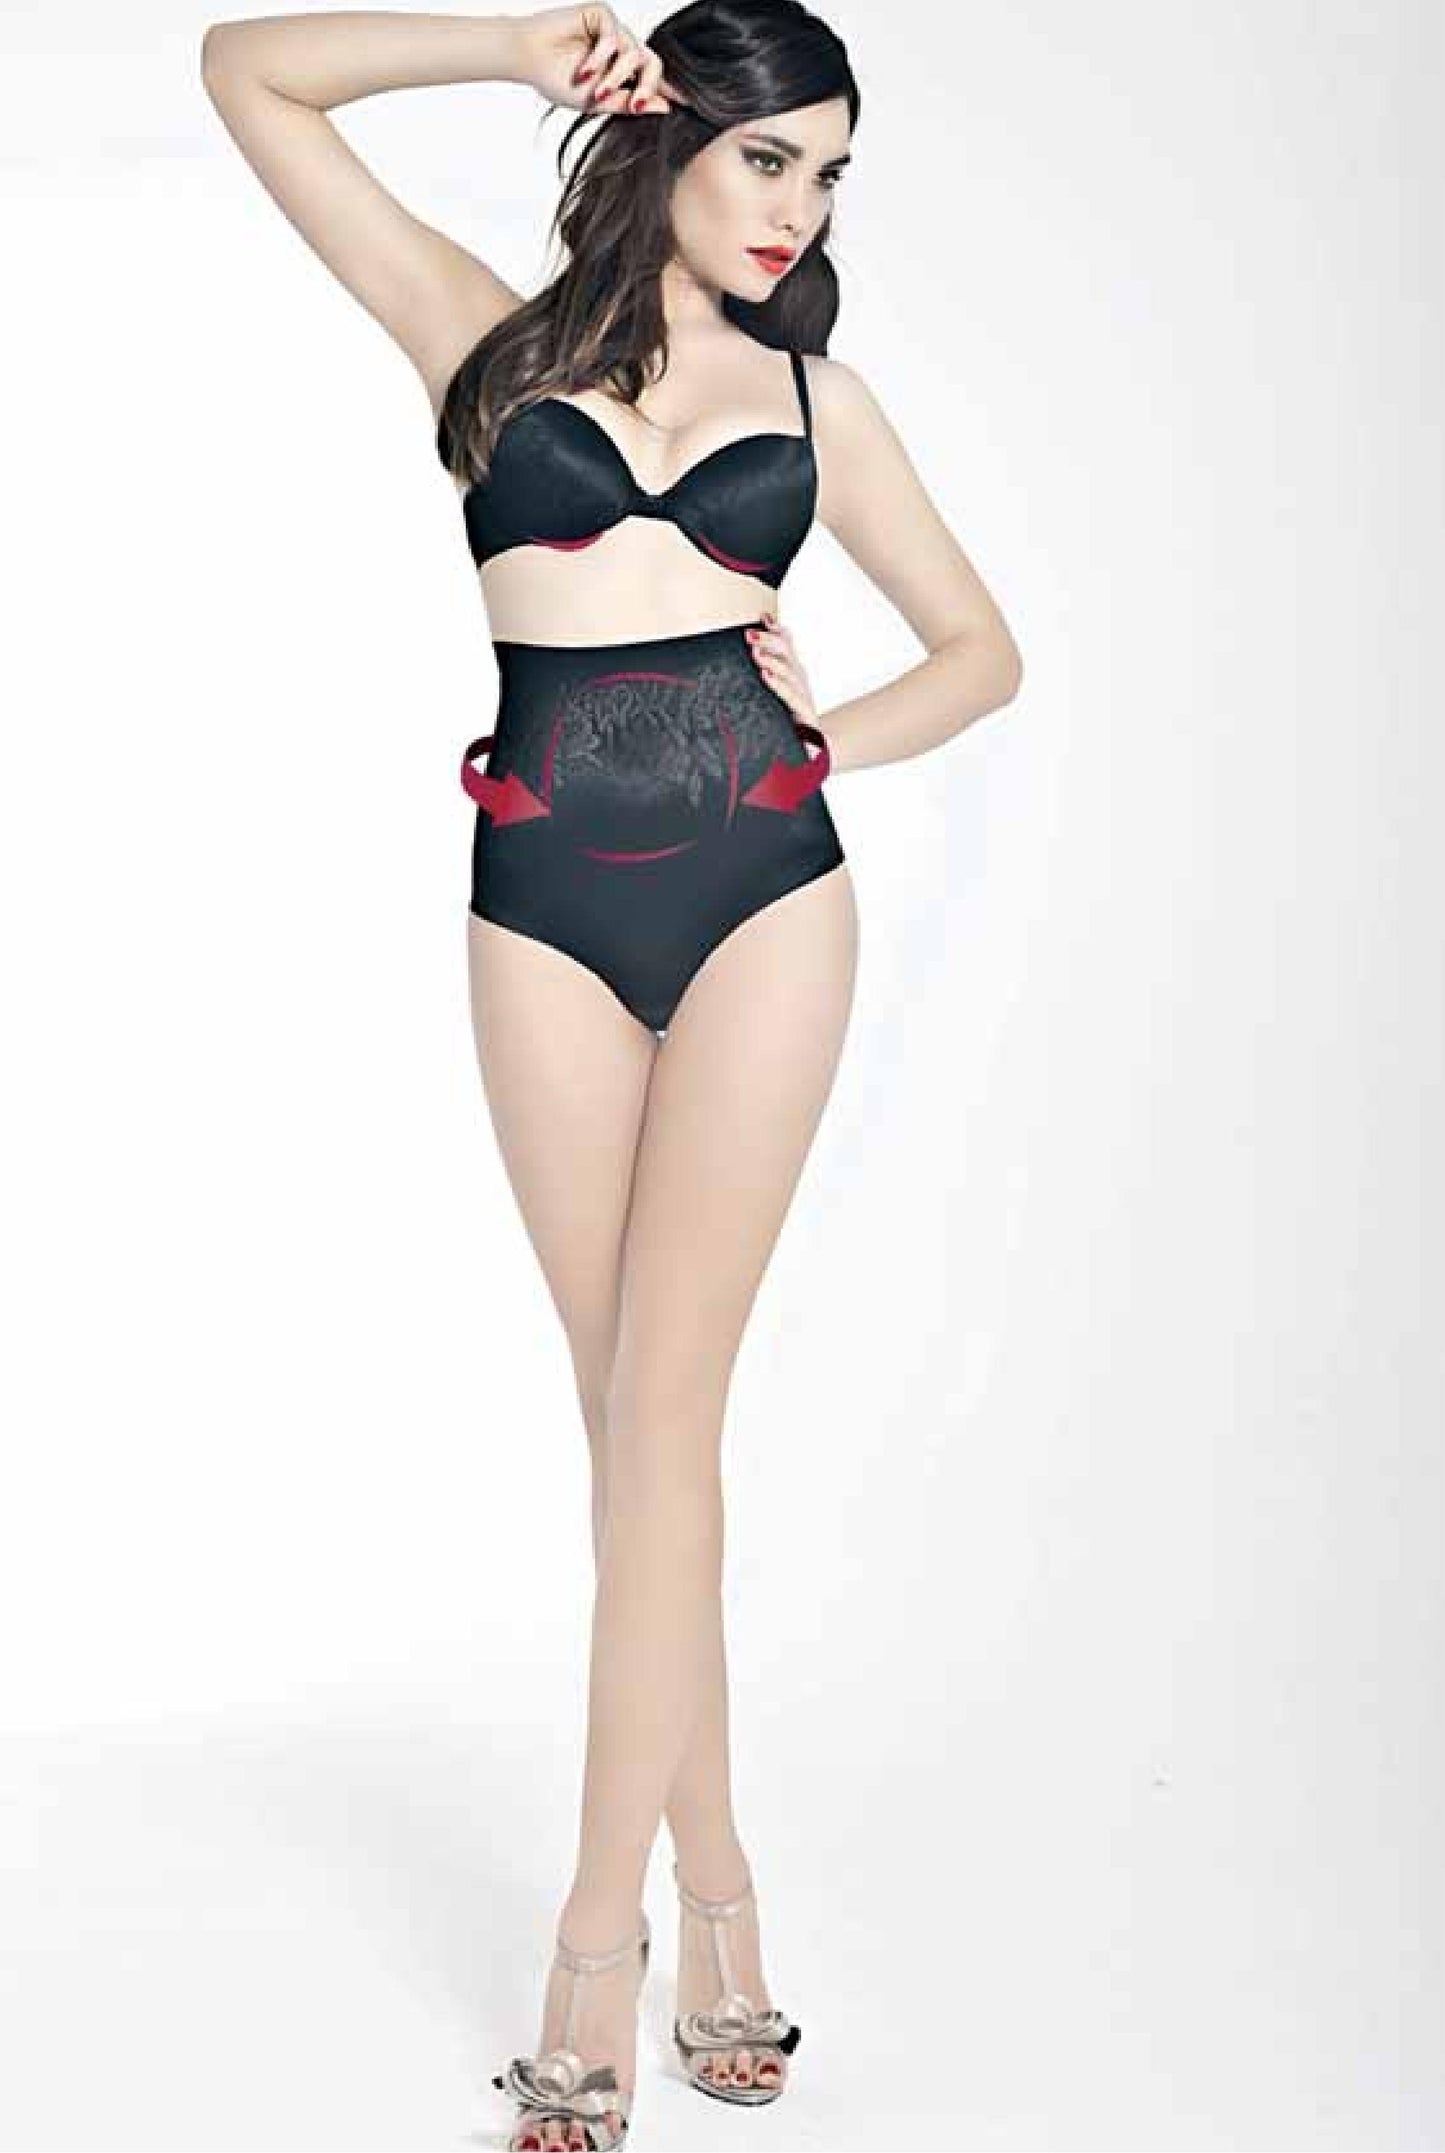 Jacquard fabric, high-waisted control culotte by Andra from Italy at Di Moda Lingerie.